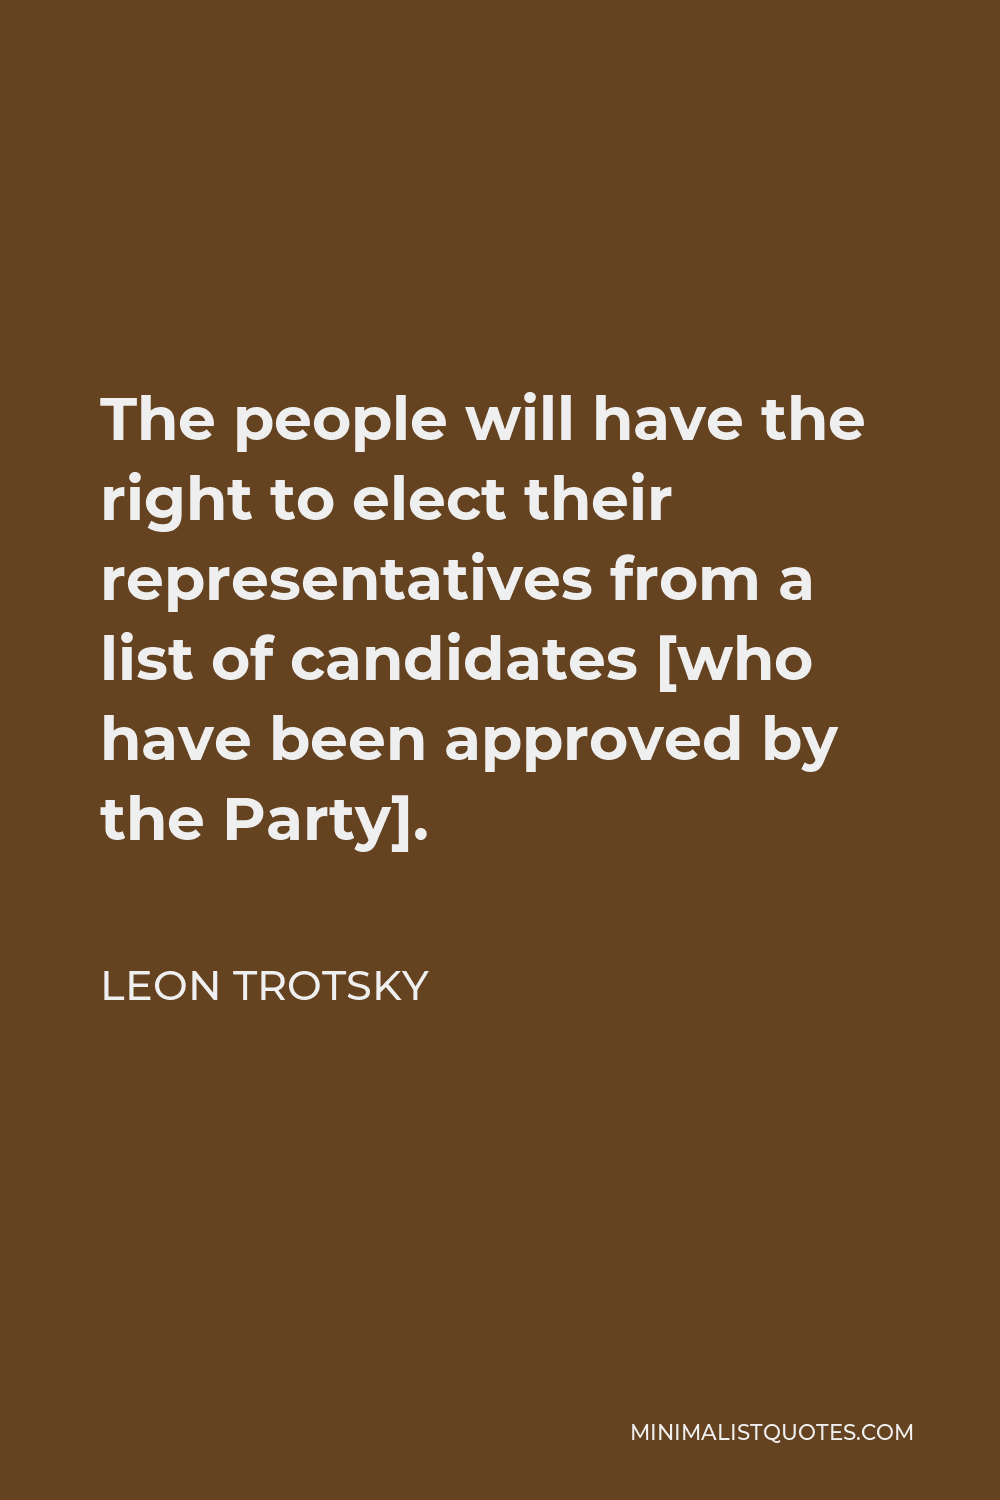 Leon Trotsky Quote - The people will have the right to elect their representatives from a list of candidates [who have been approved by the Party].